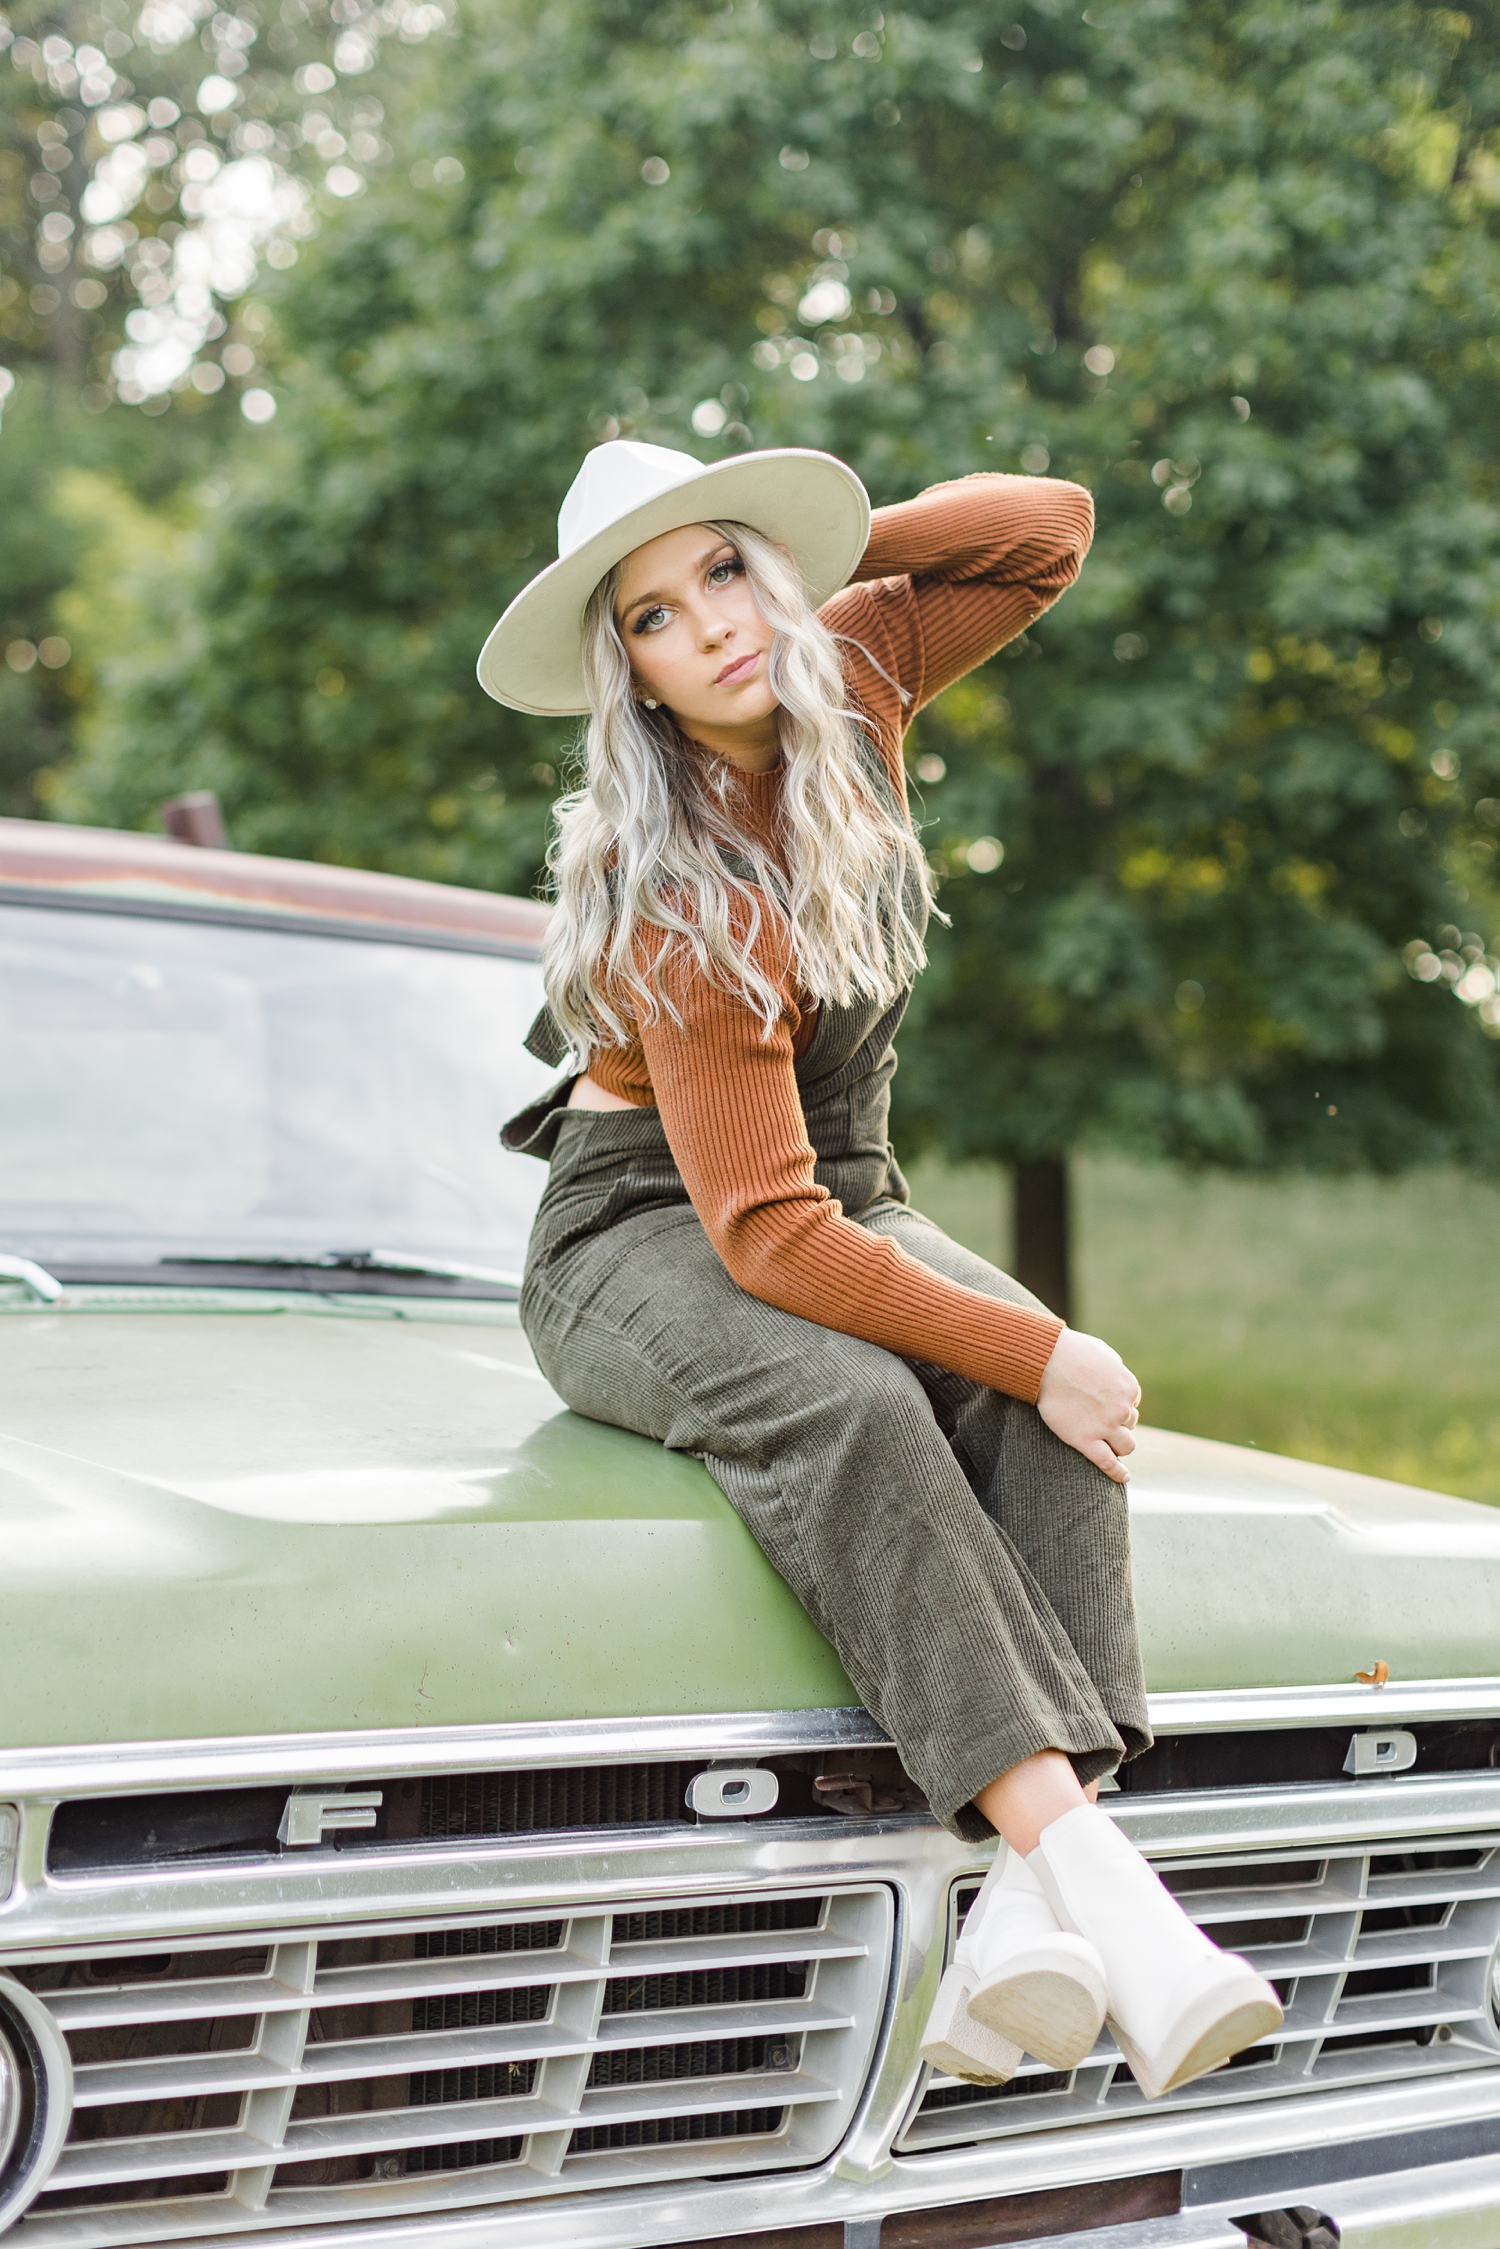 Shelby sits on the hood of a green 72 Ford truck in the middle of a grassy pasture | CB Studio